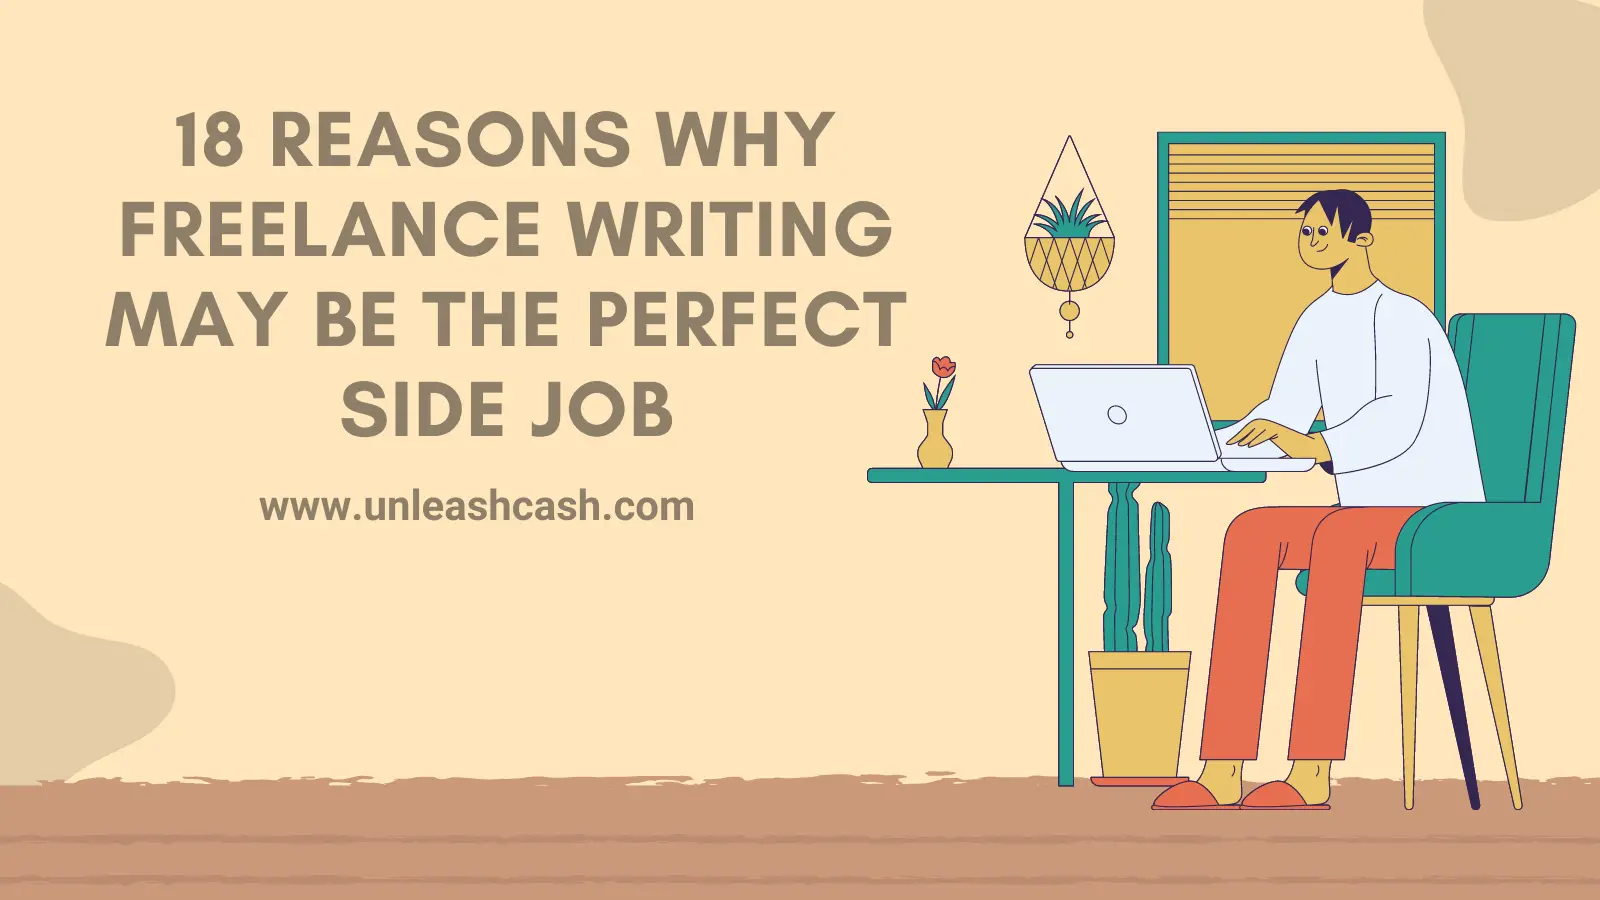 18 Reasons Why Freelance Writing May Be the Perfect Side Job